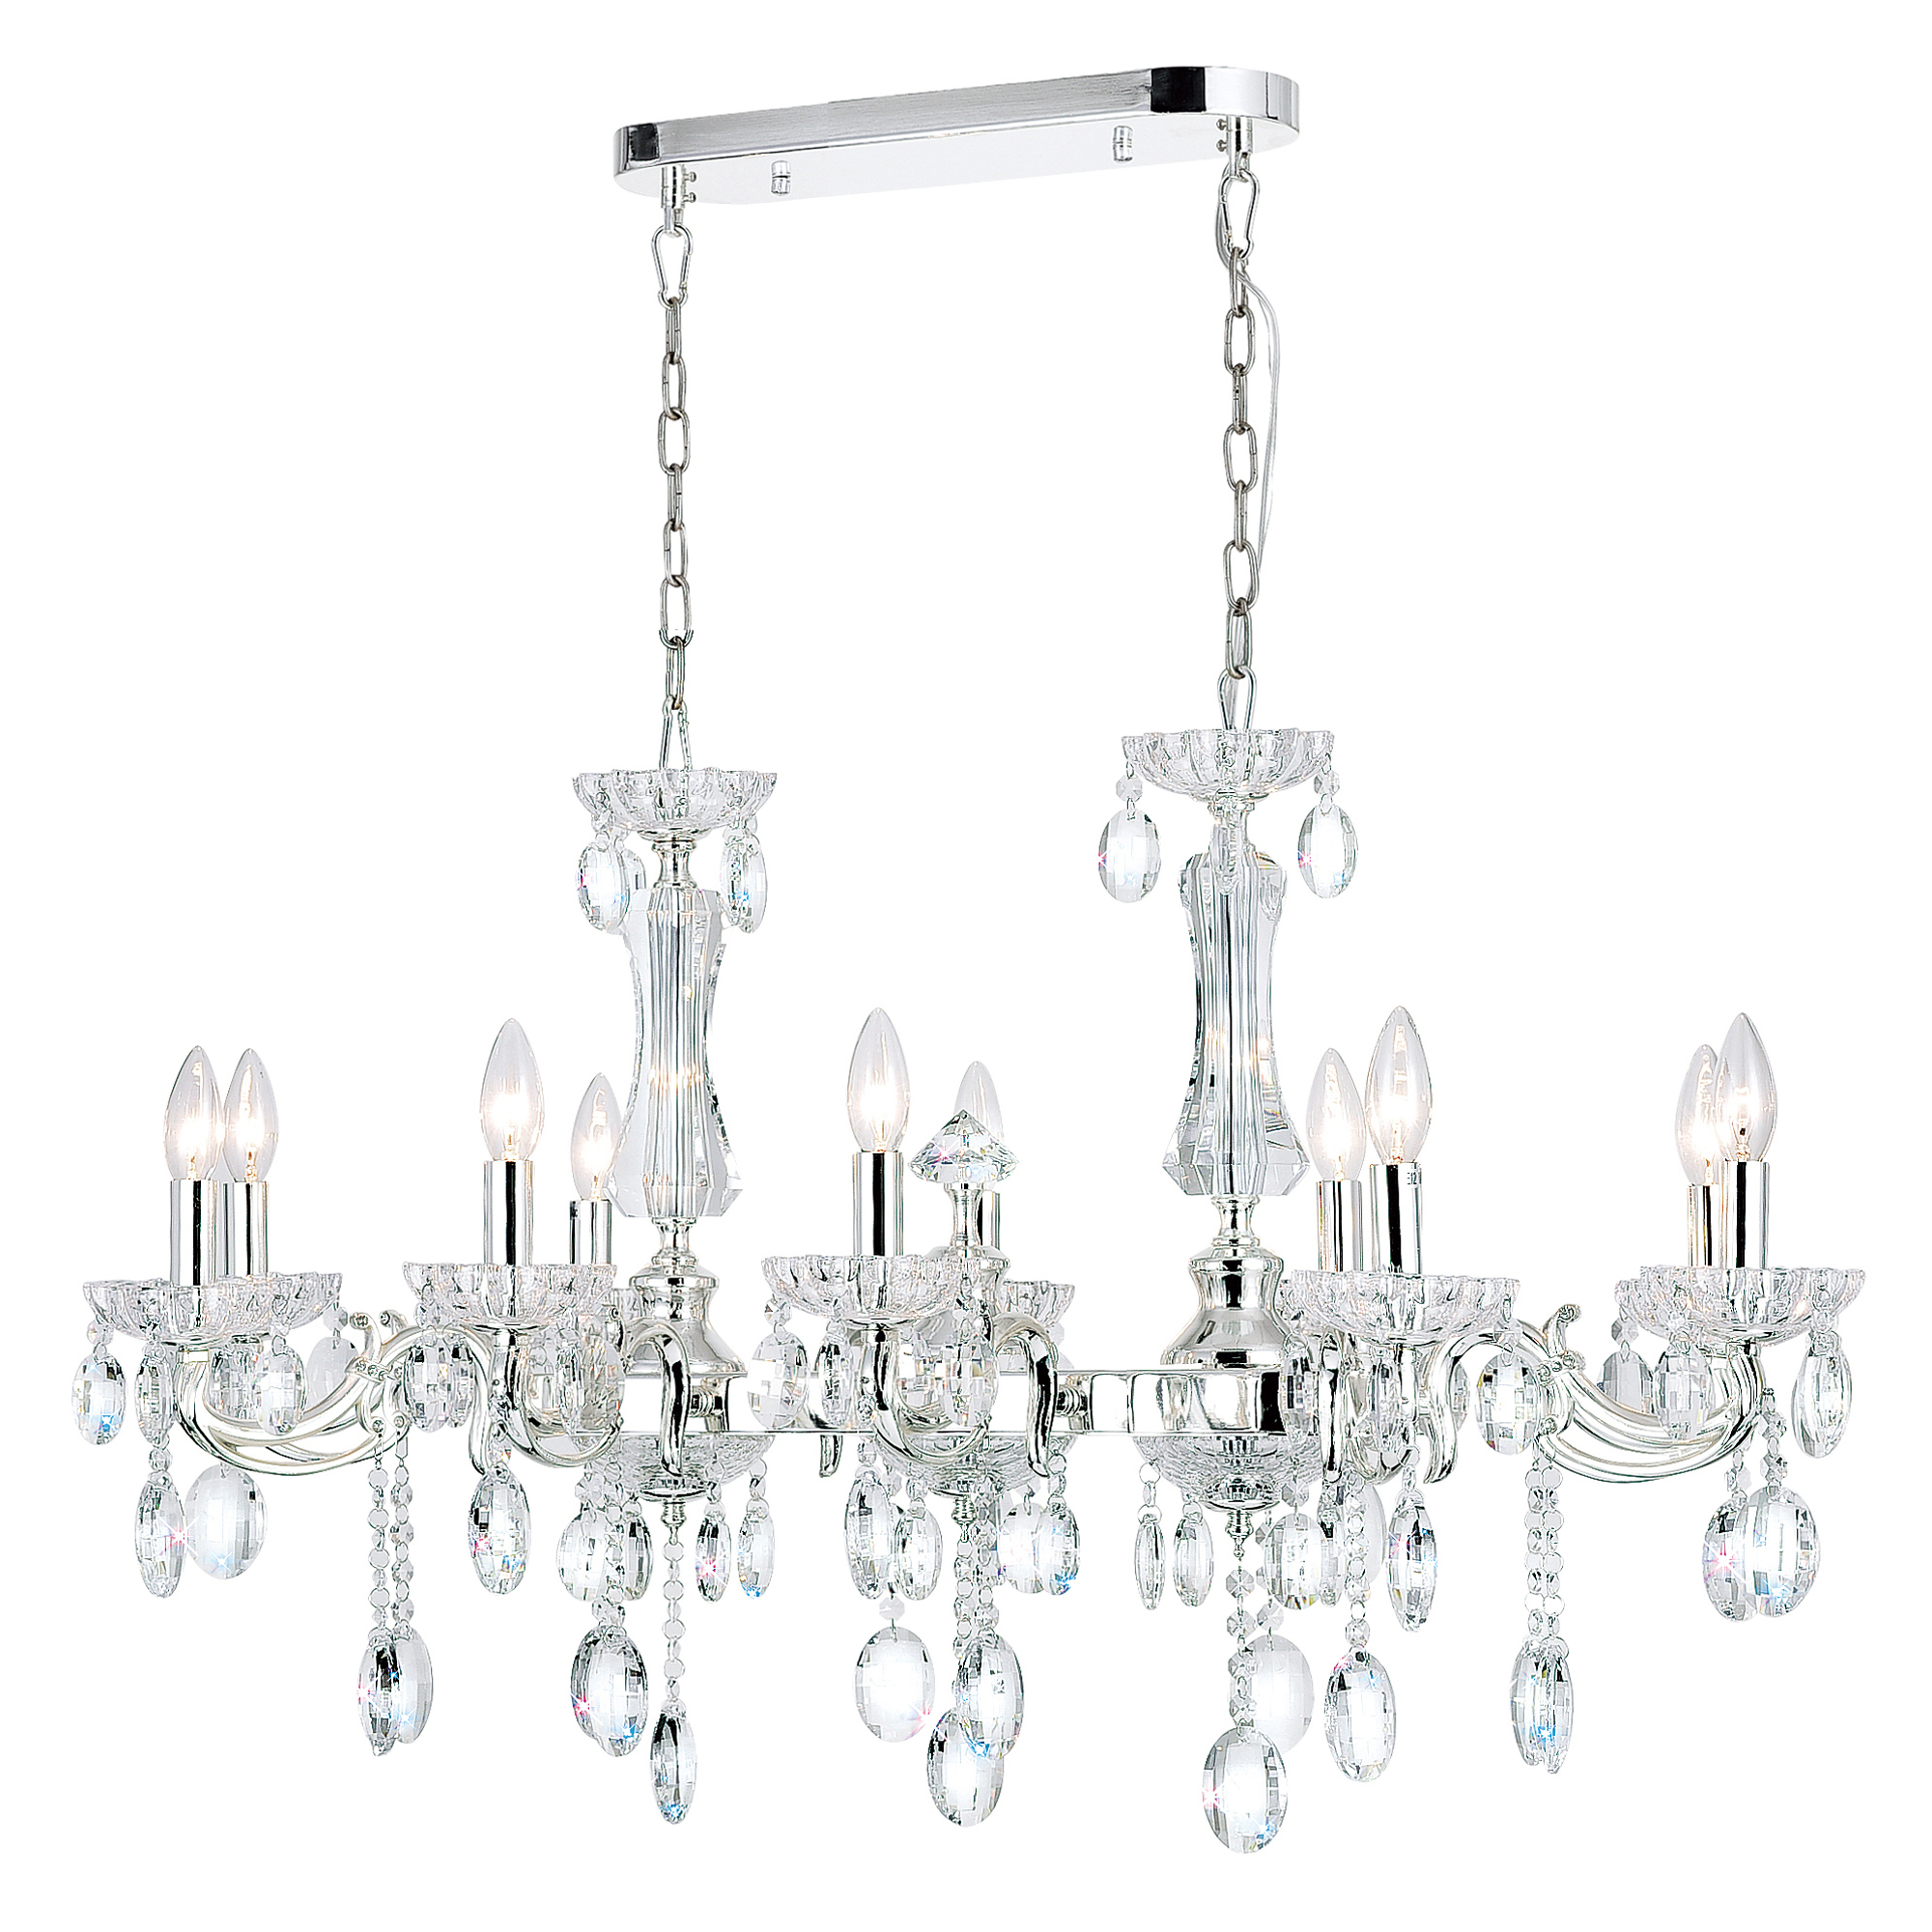 Flawless 10 Light Up Chandelier With Chrome Finish